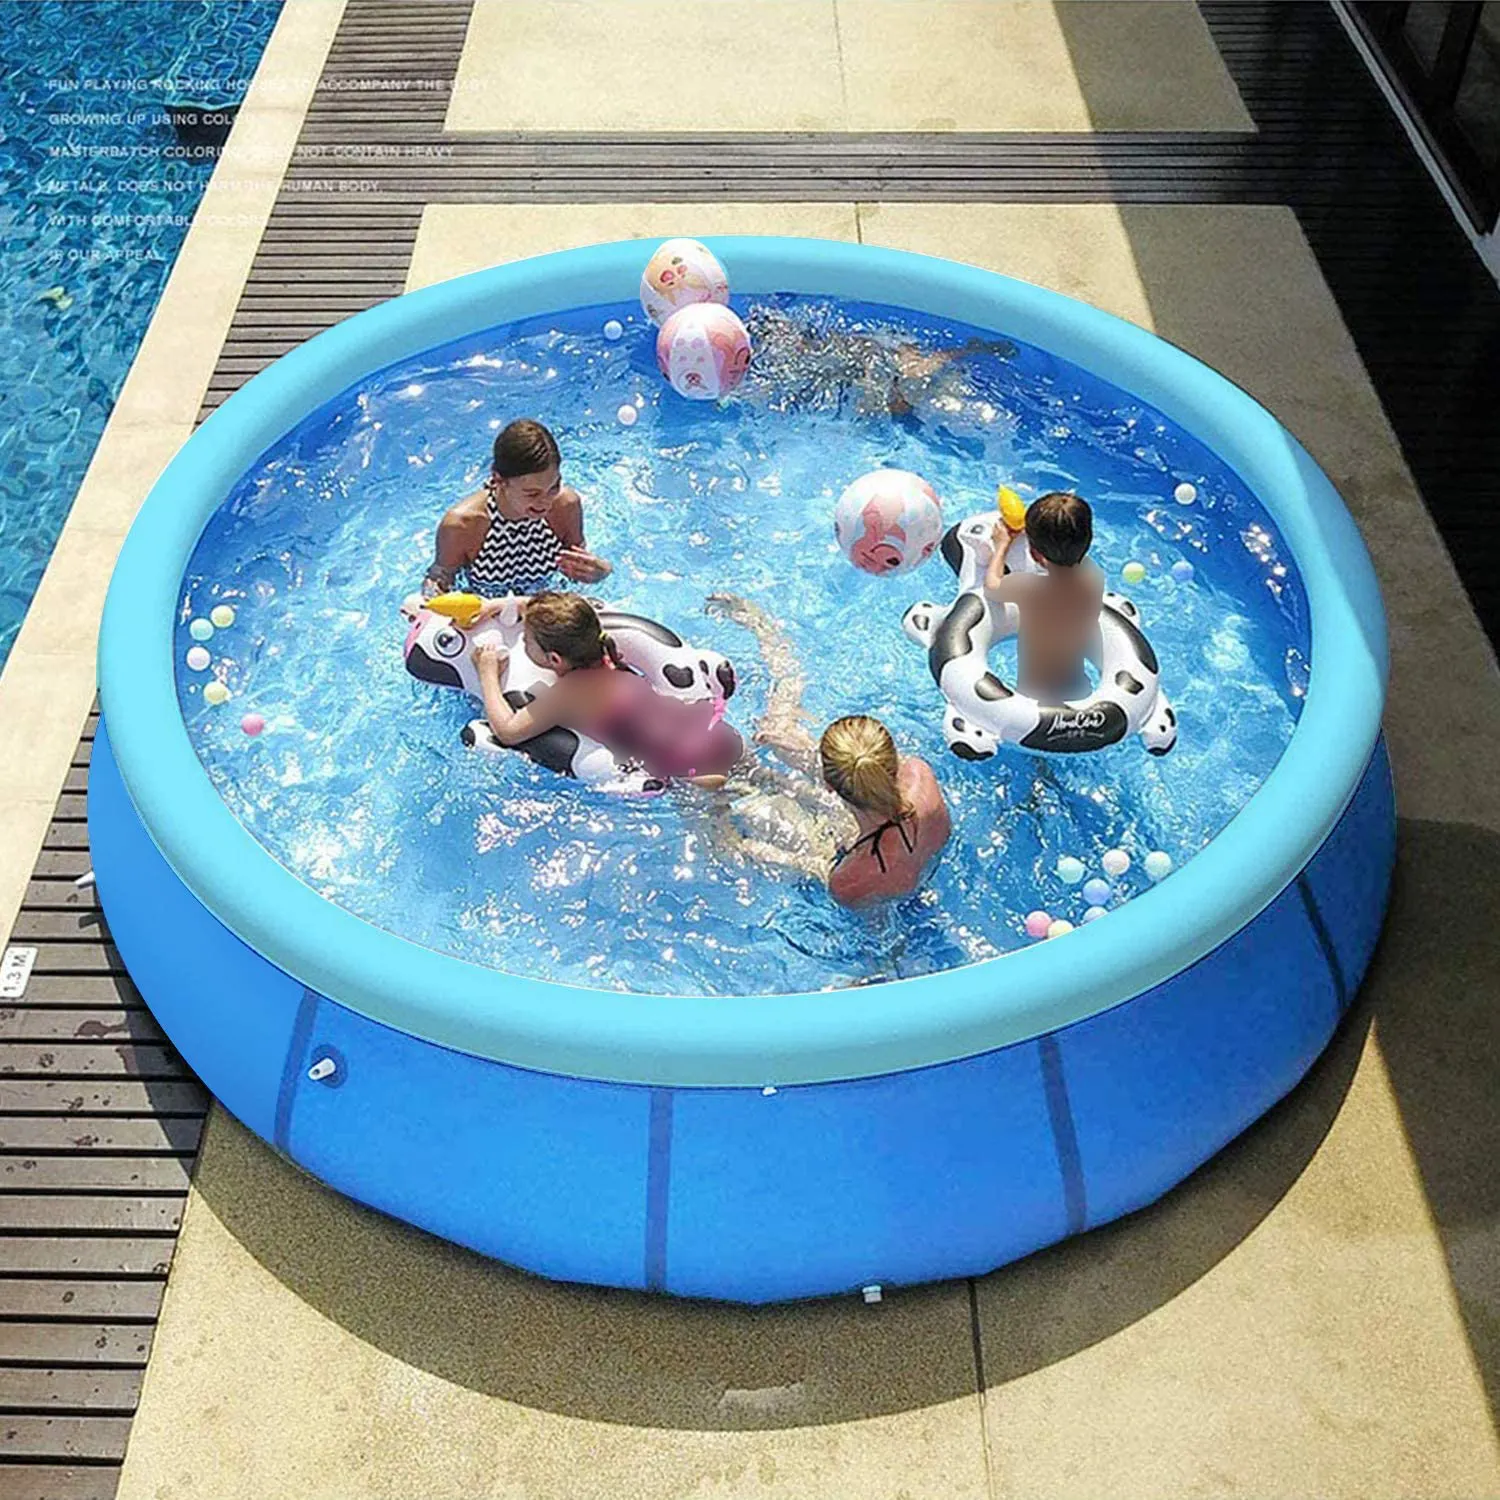 1-10 People Family Inflatable Swimming Pools Above Ground for Backyard/Outside, Portable Blow Up Swimming Pools for Kids, Adults